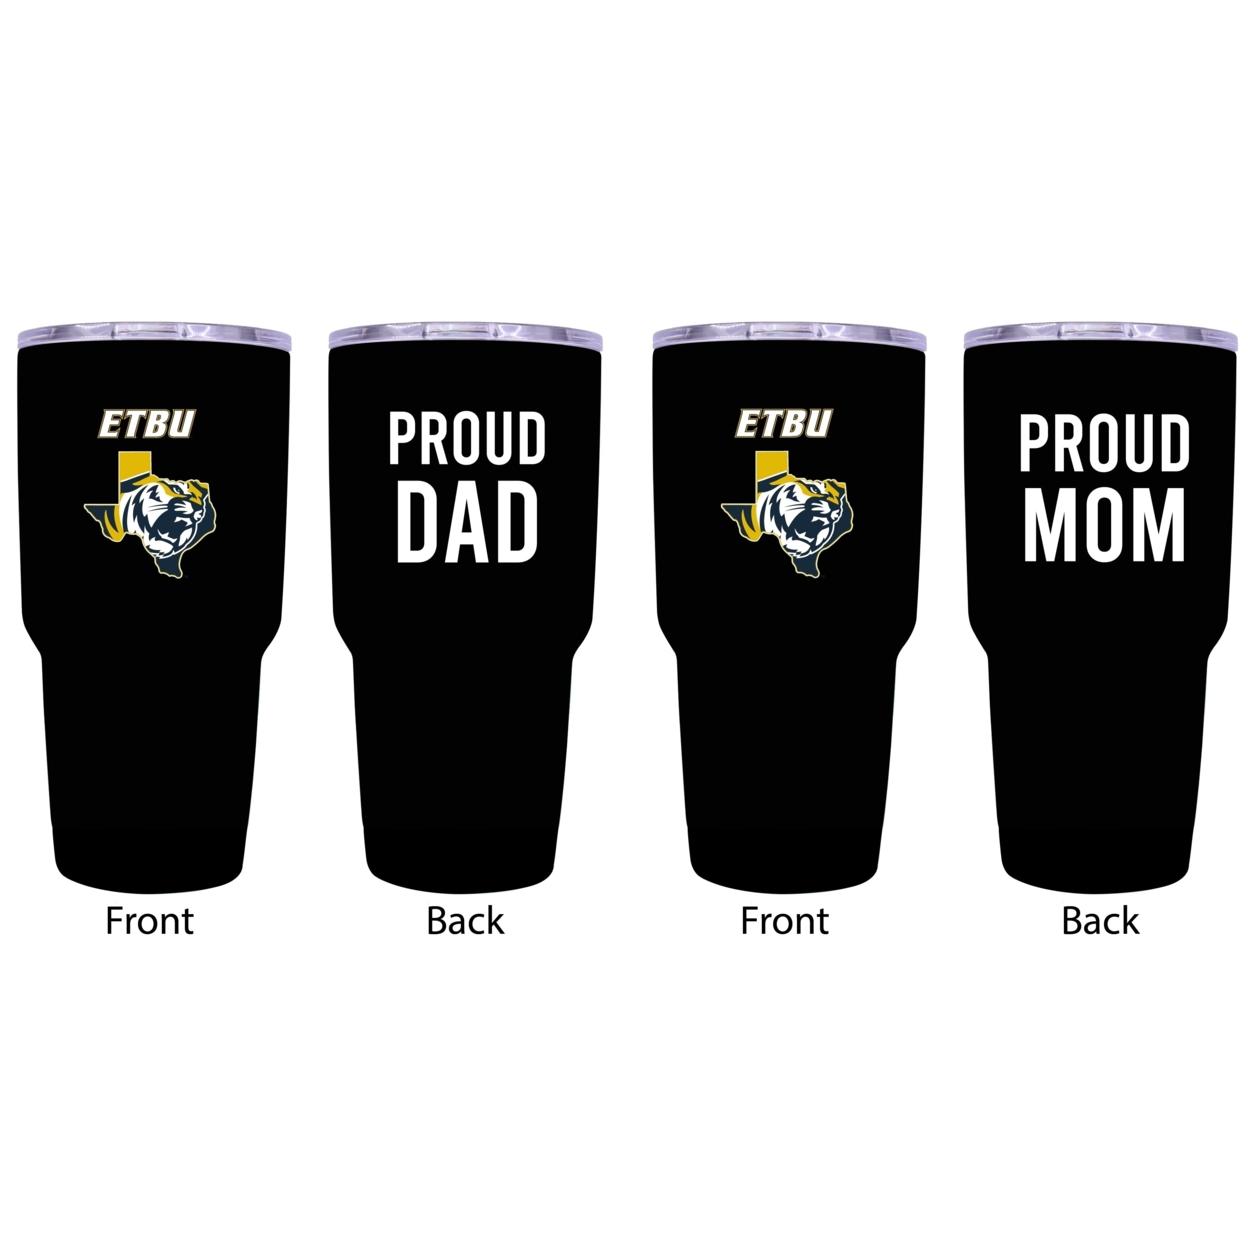 East Texas Baptist University Proud Mom And Dad 24 Oz Insulated Stainless Steel Tumblers 2 Pack Black.